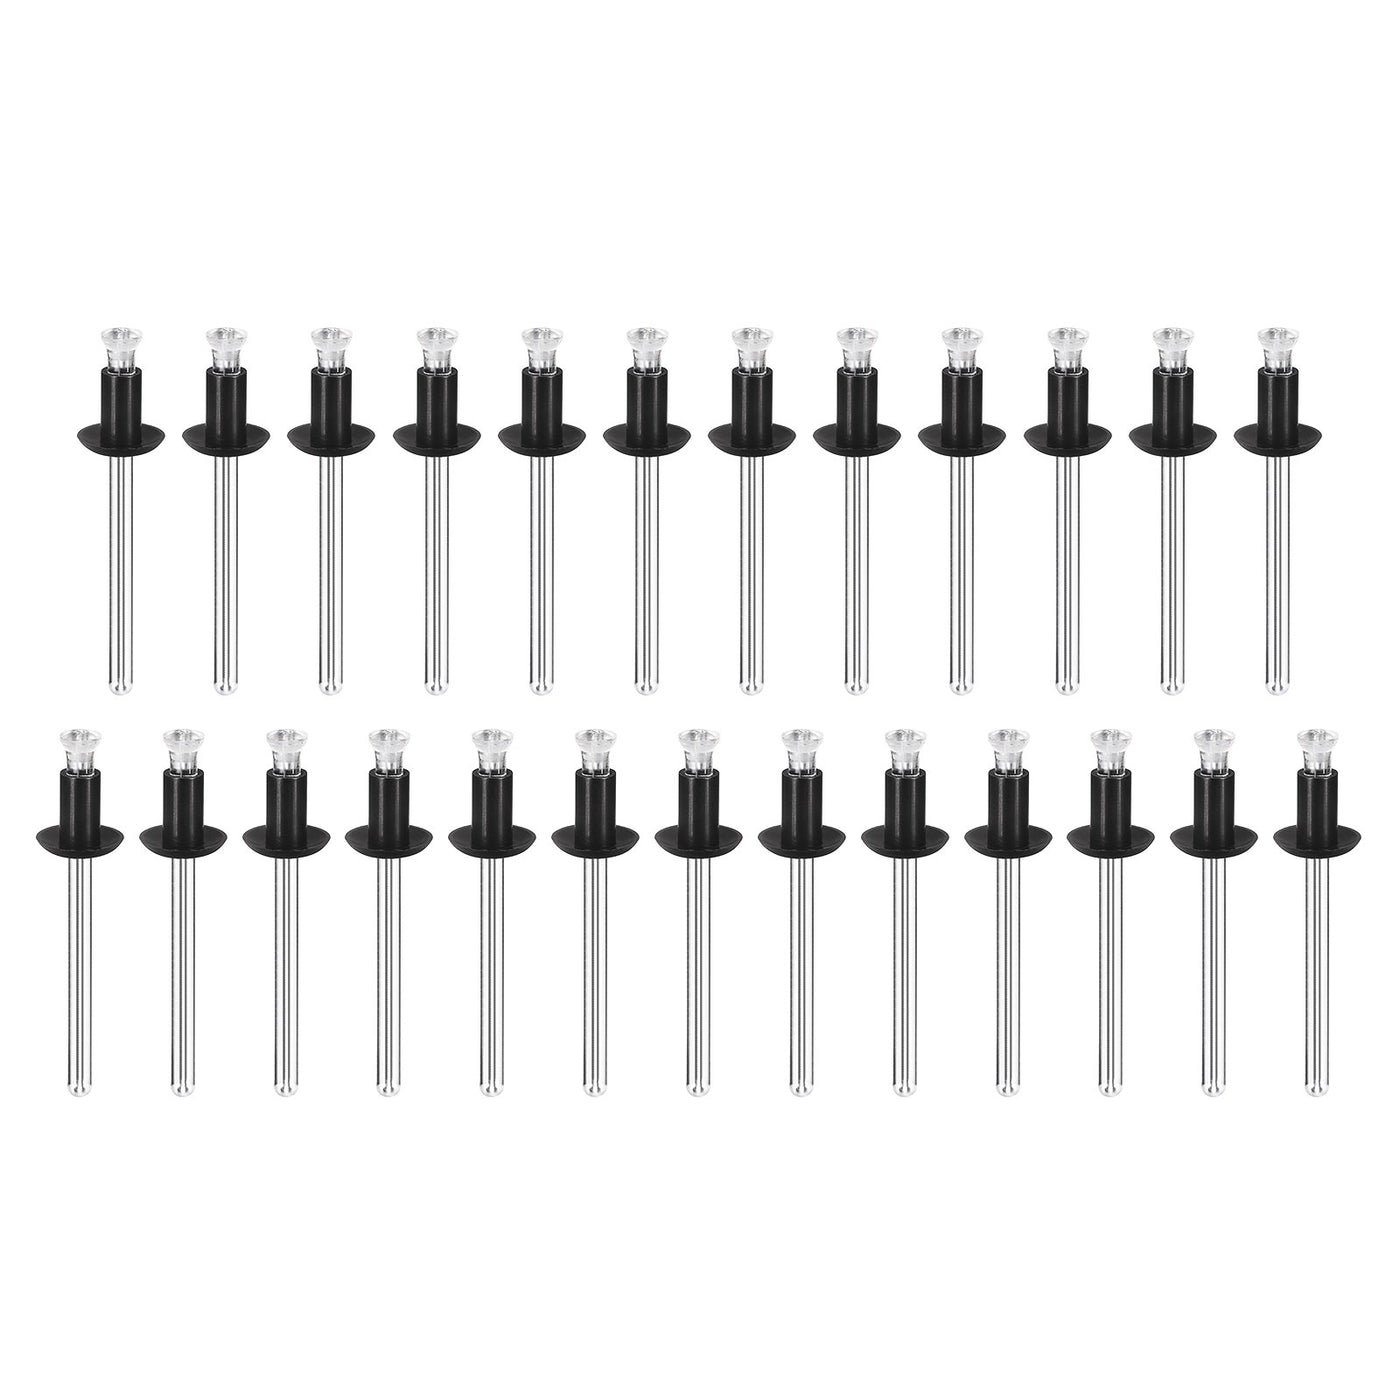 uxcell Uxcell 5.6mm x 9.6mm Nylon Blind Rivets for PC Board Bumper Trim Retainer, Black 50Pcs